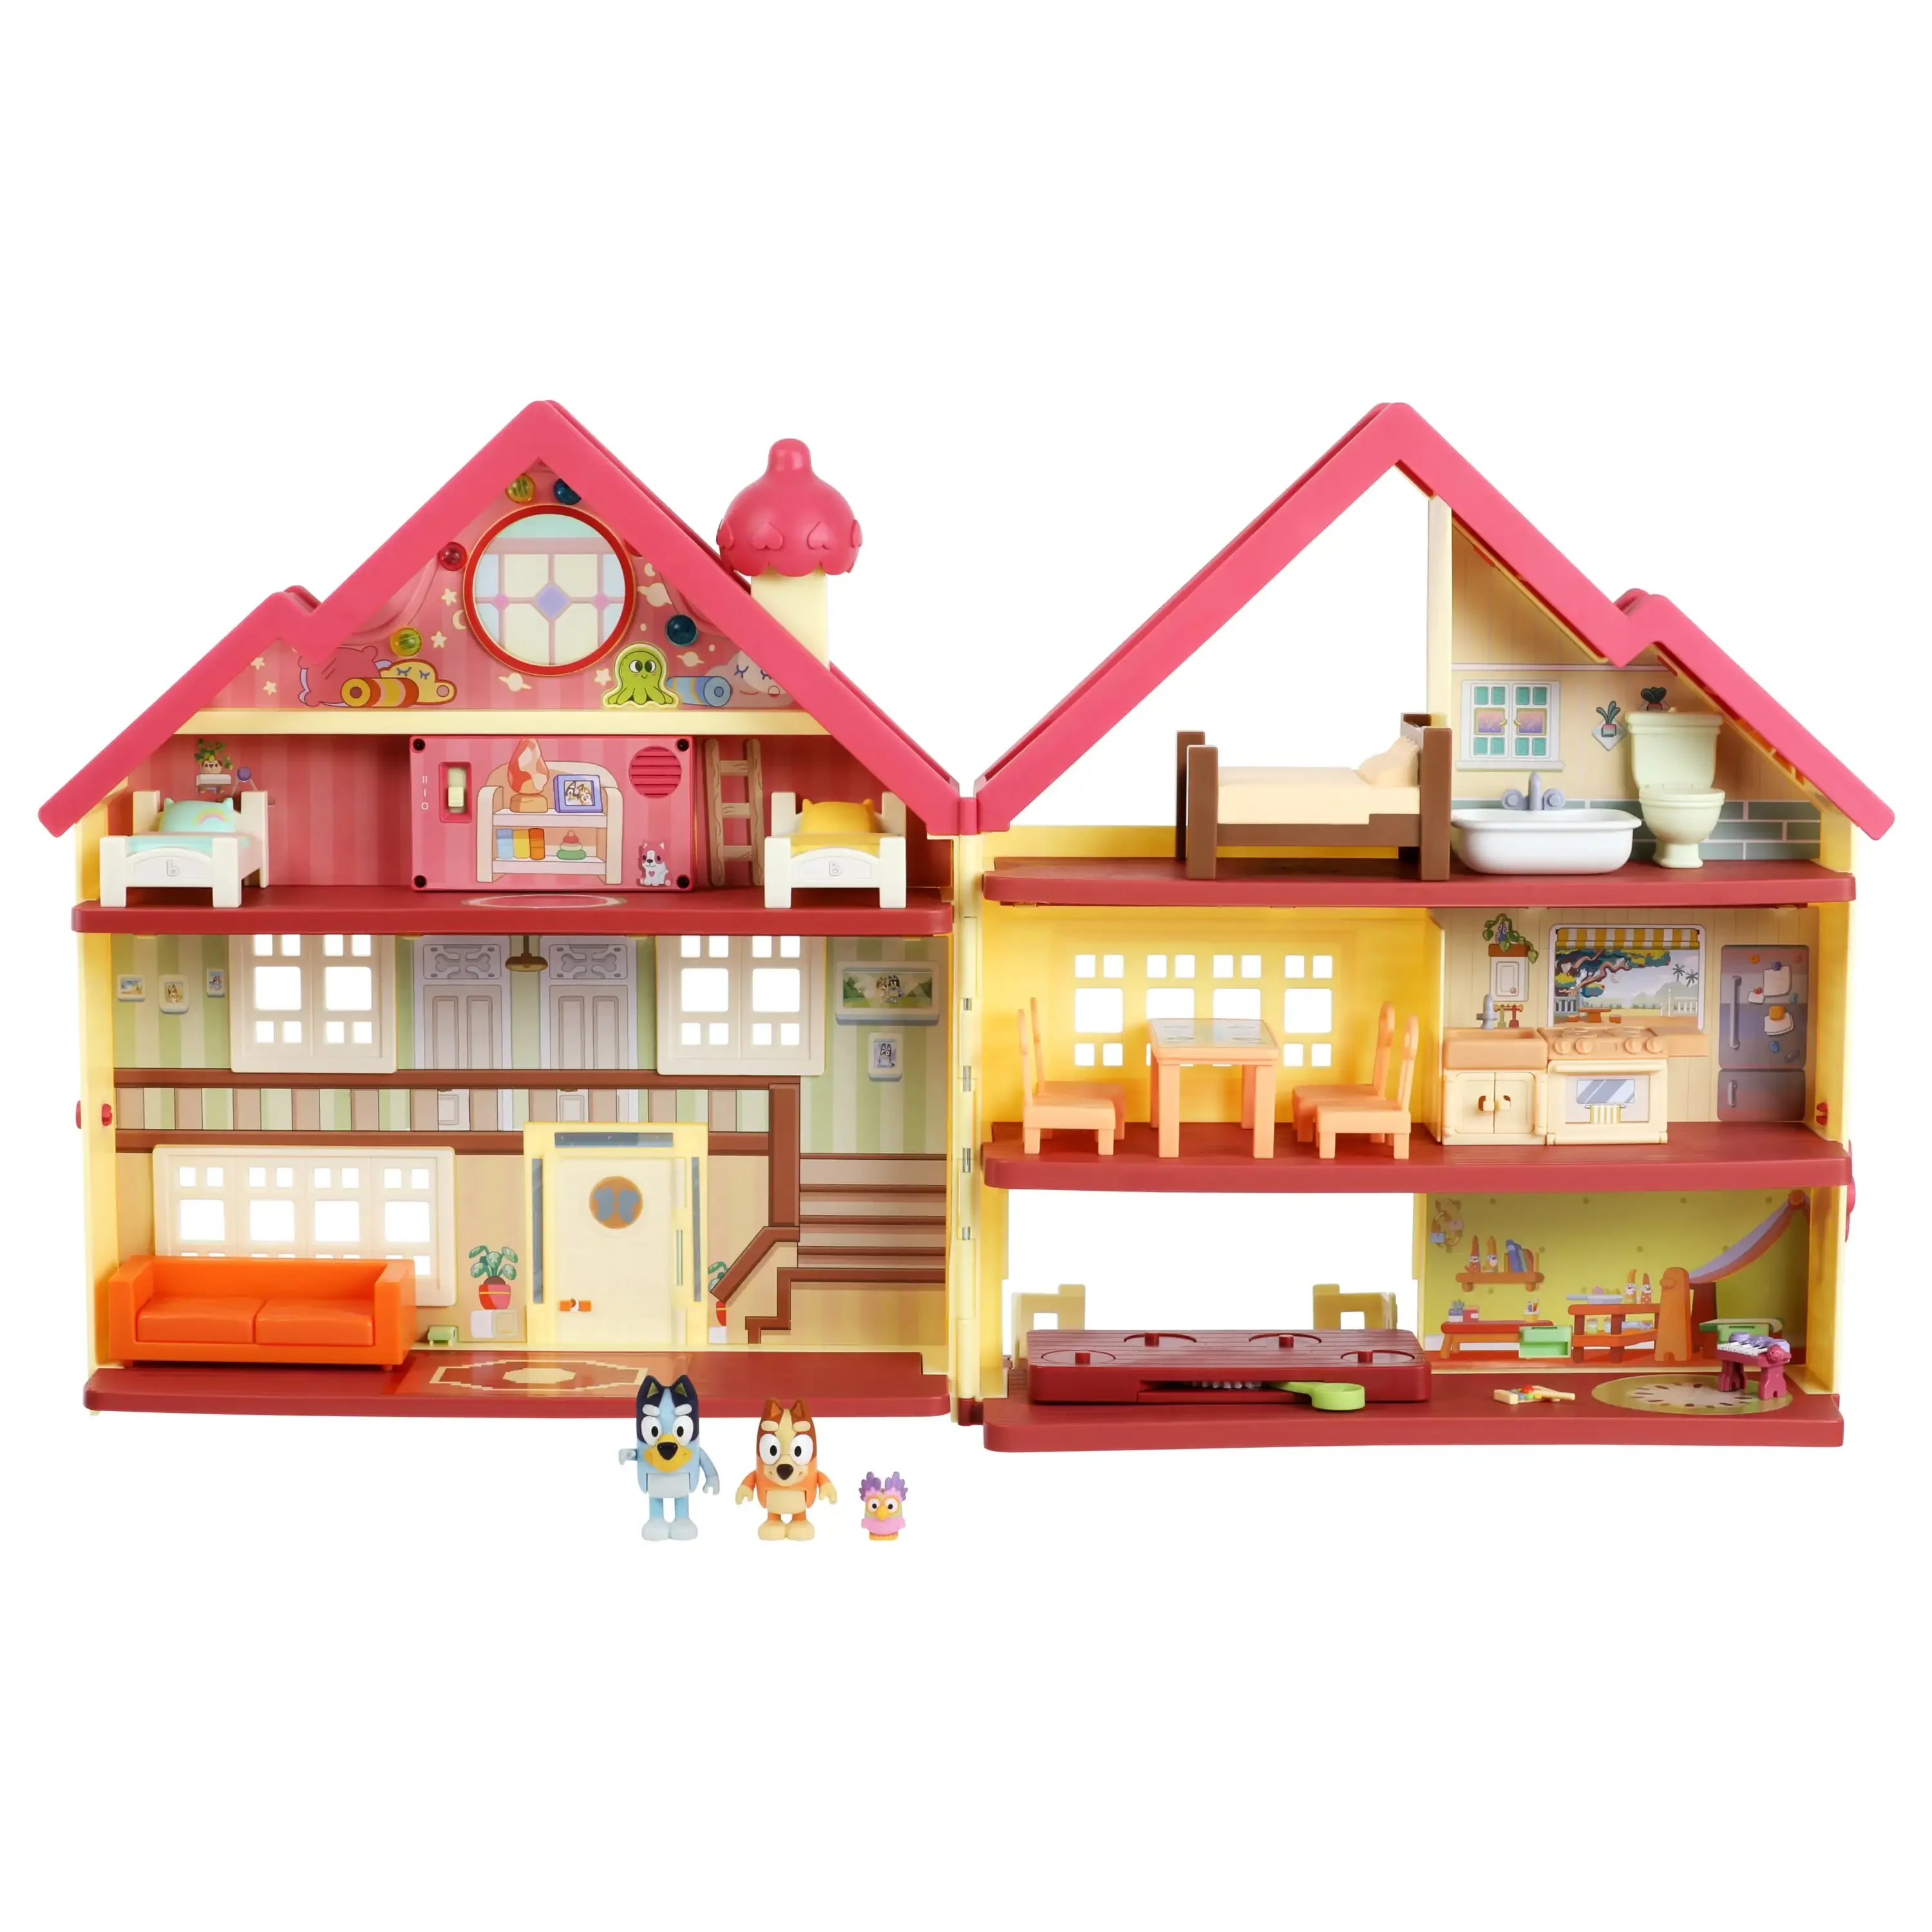 

Ultimate Lights & Sounds Playhouse with Figures and Accessories, Preschool, Ages 3+